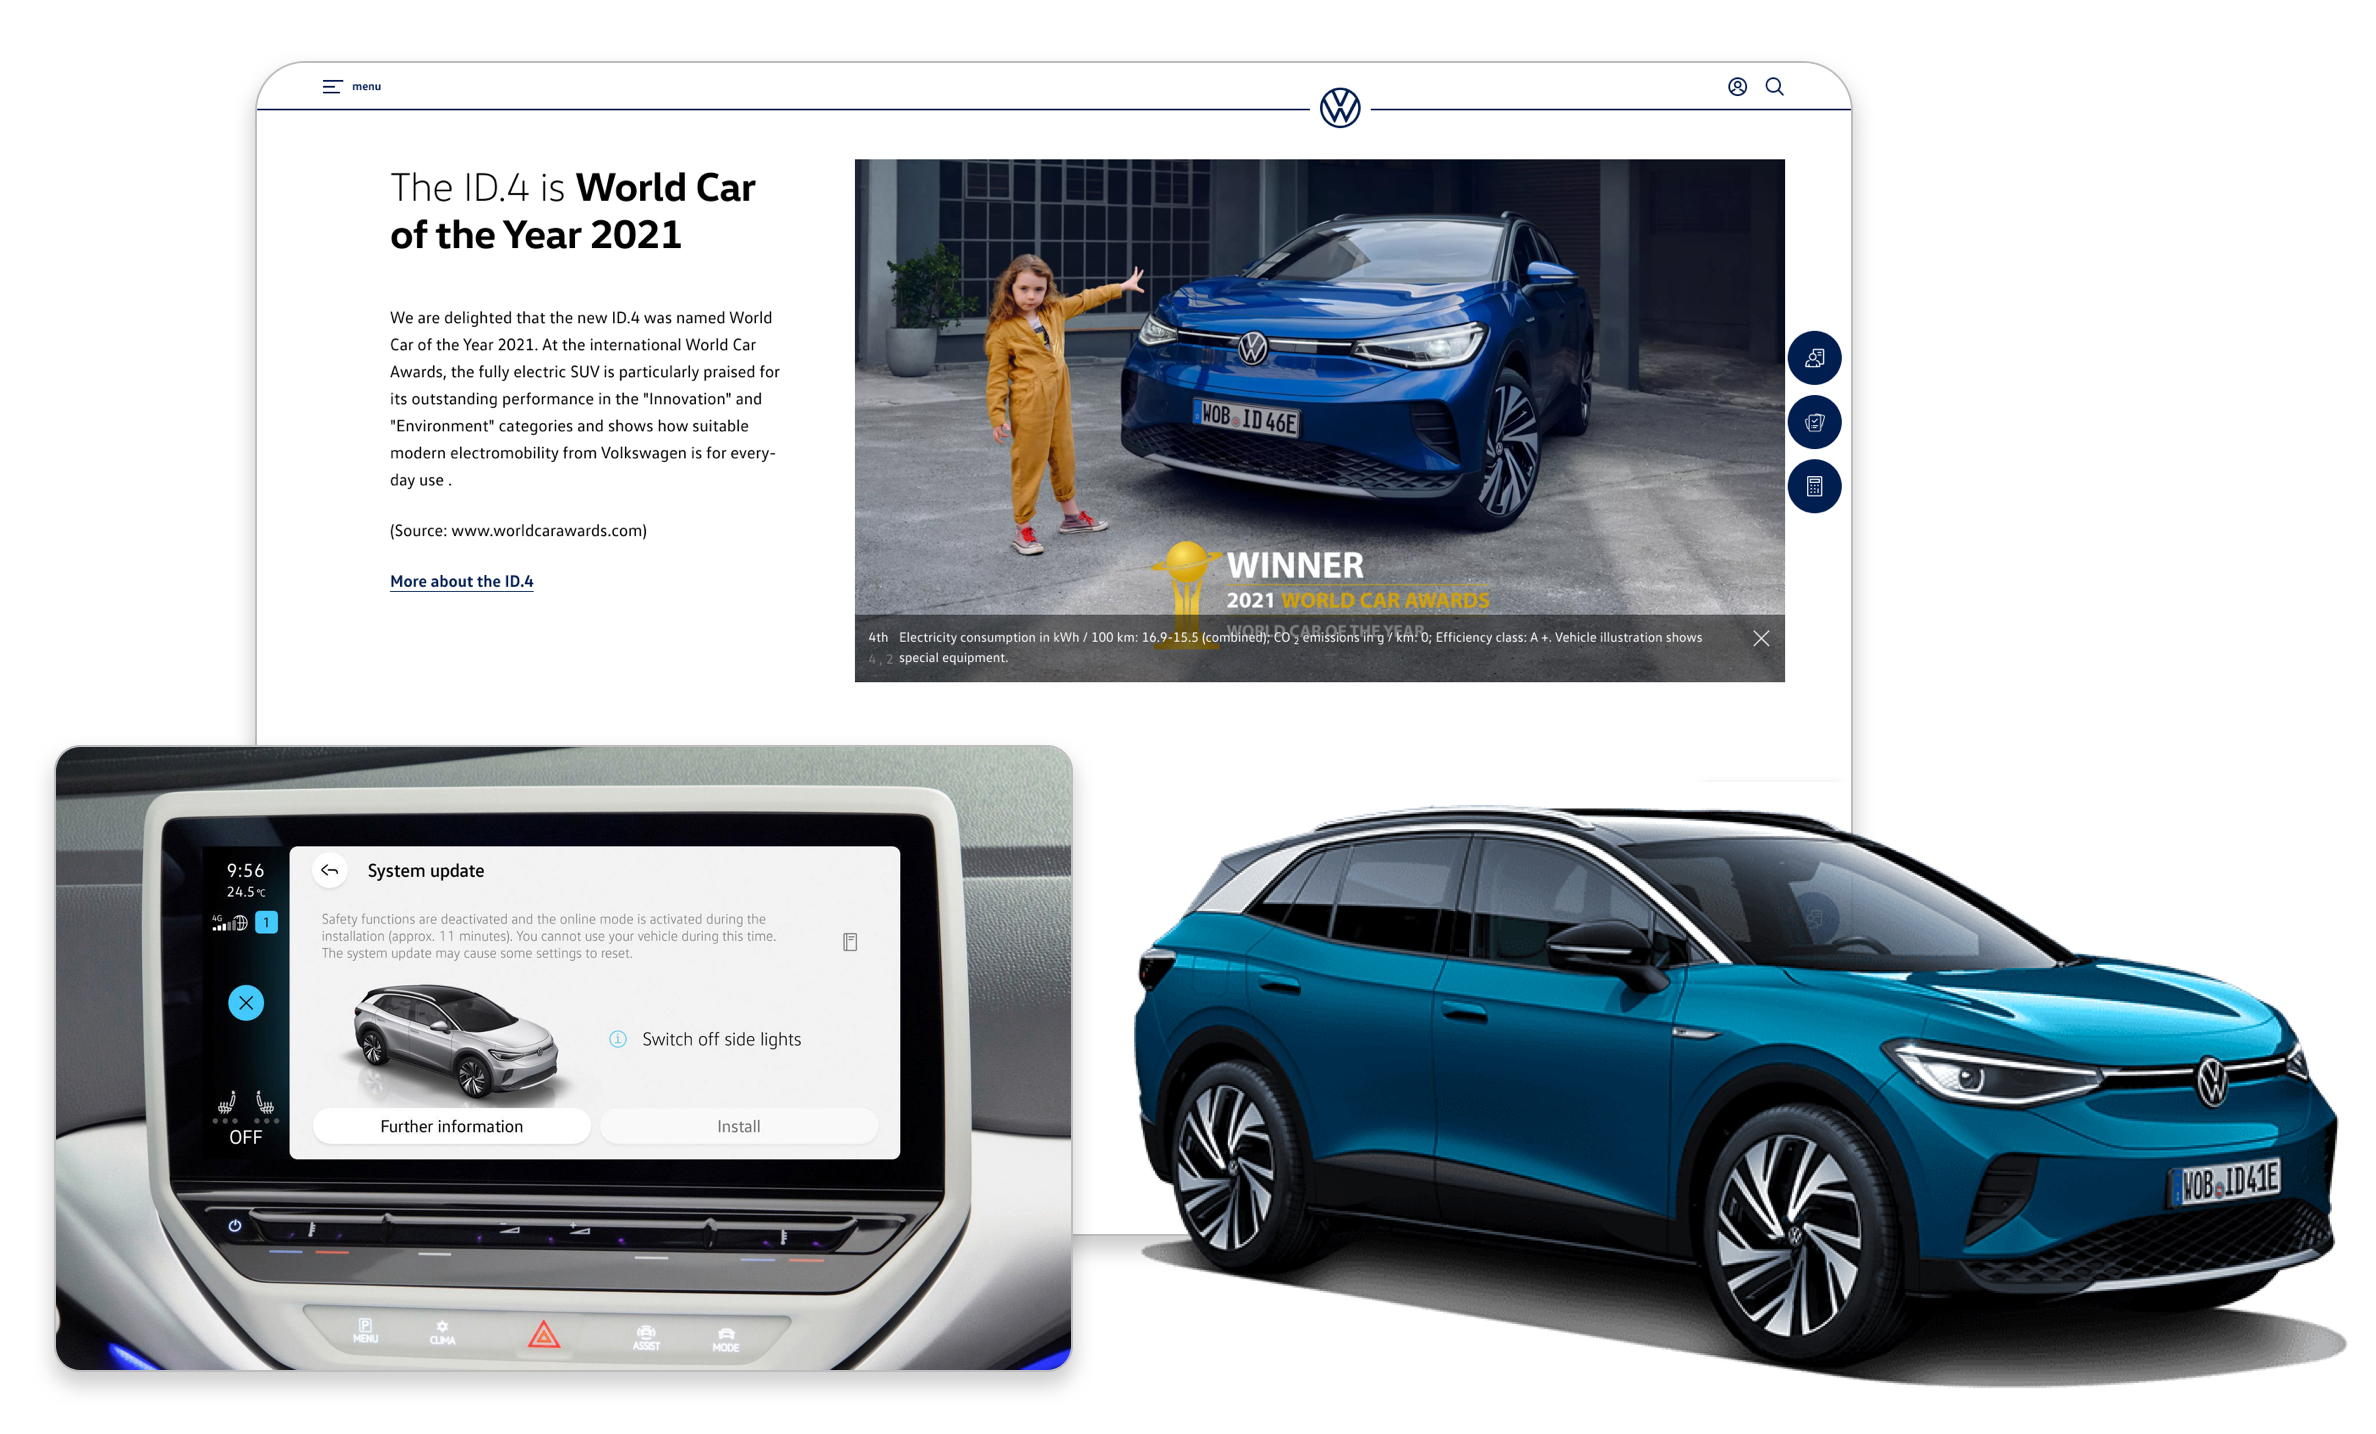 Volkswagen's group-wide digital commerce solution enables customer contact across all touchpoints